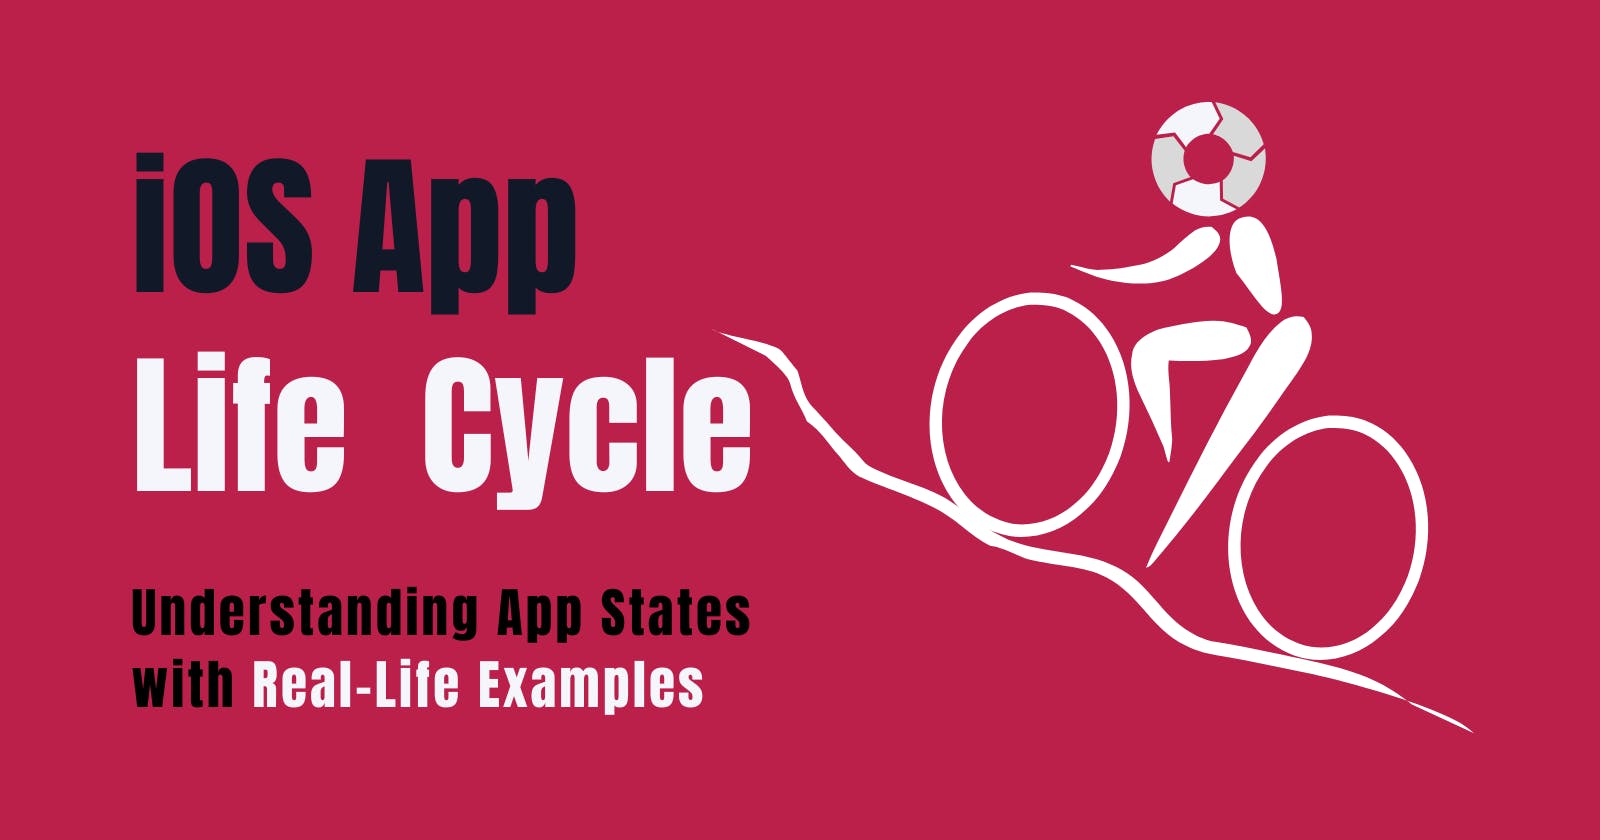 iOS App Life Cycle: Understanding App States with Real-Life Examples